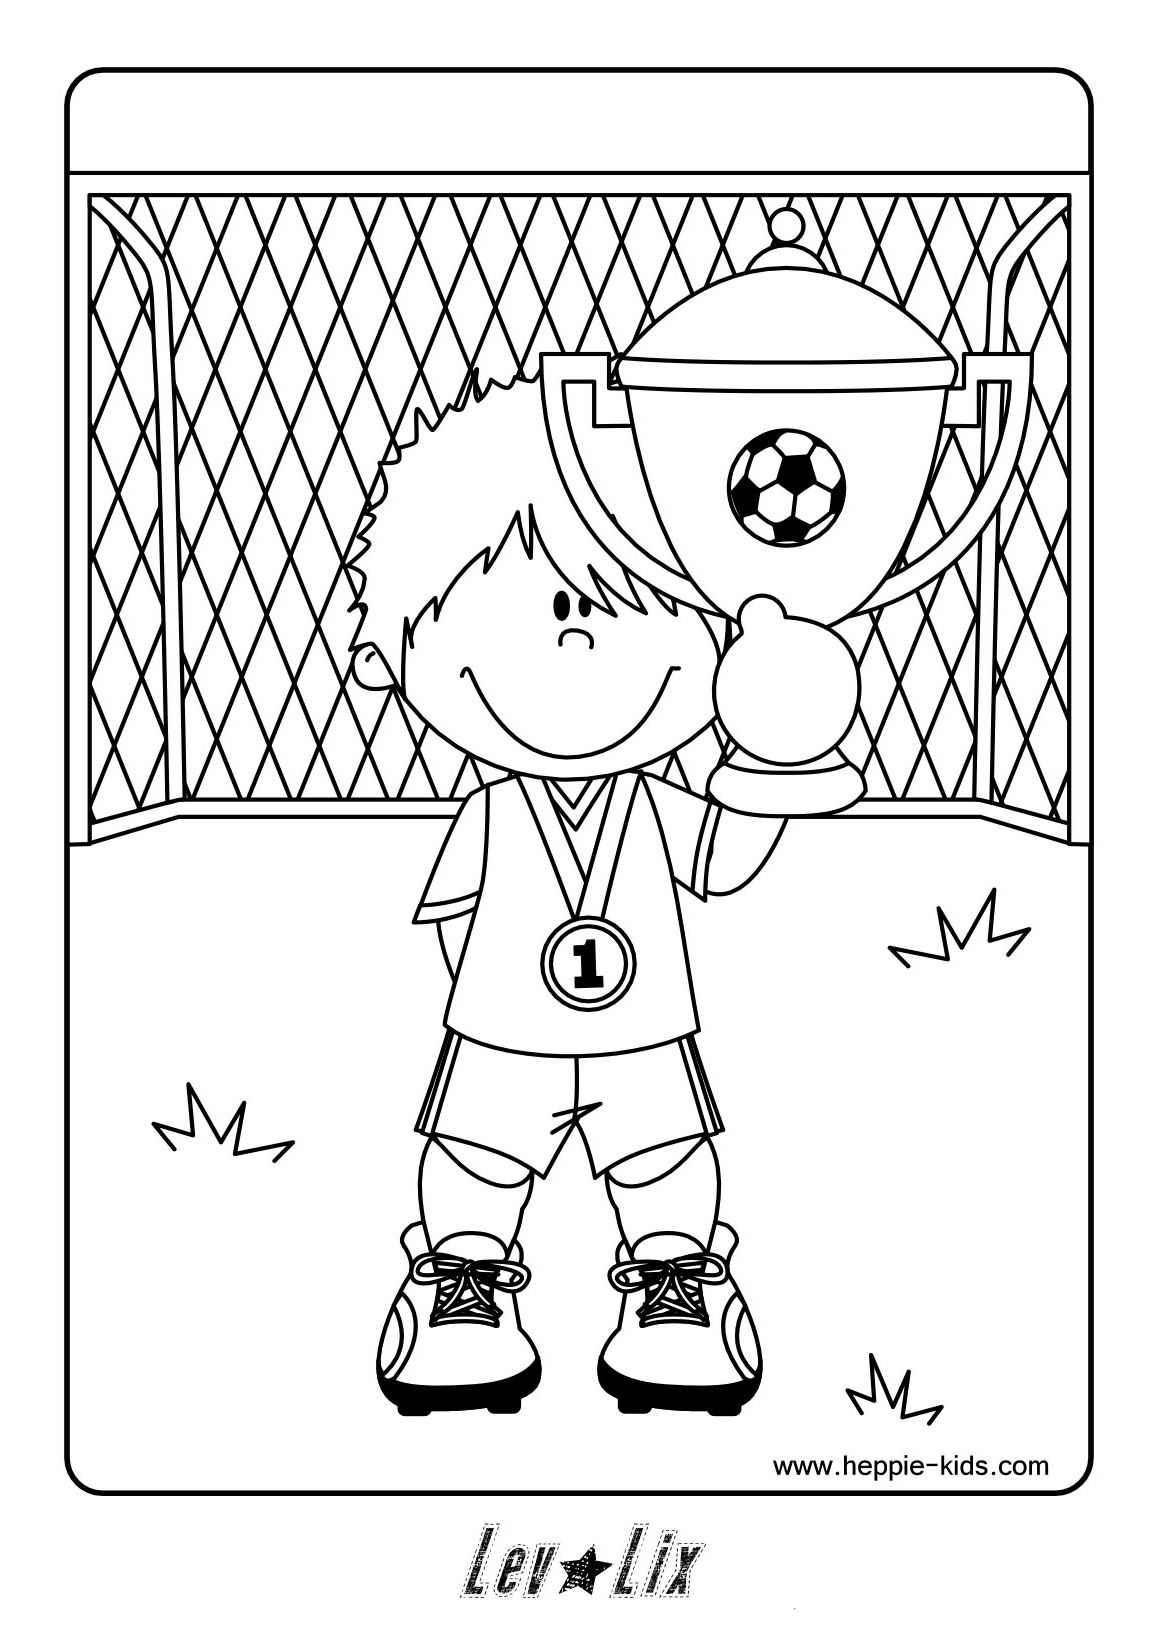 Soccer Guy Sports Coloring Pages Football Coloring Pages